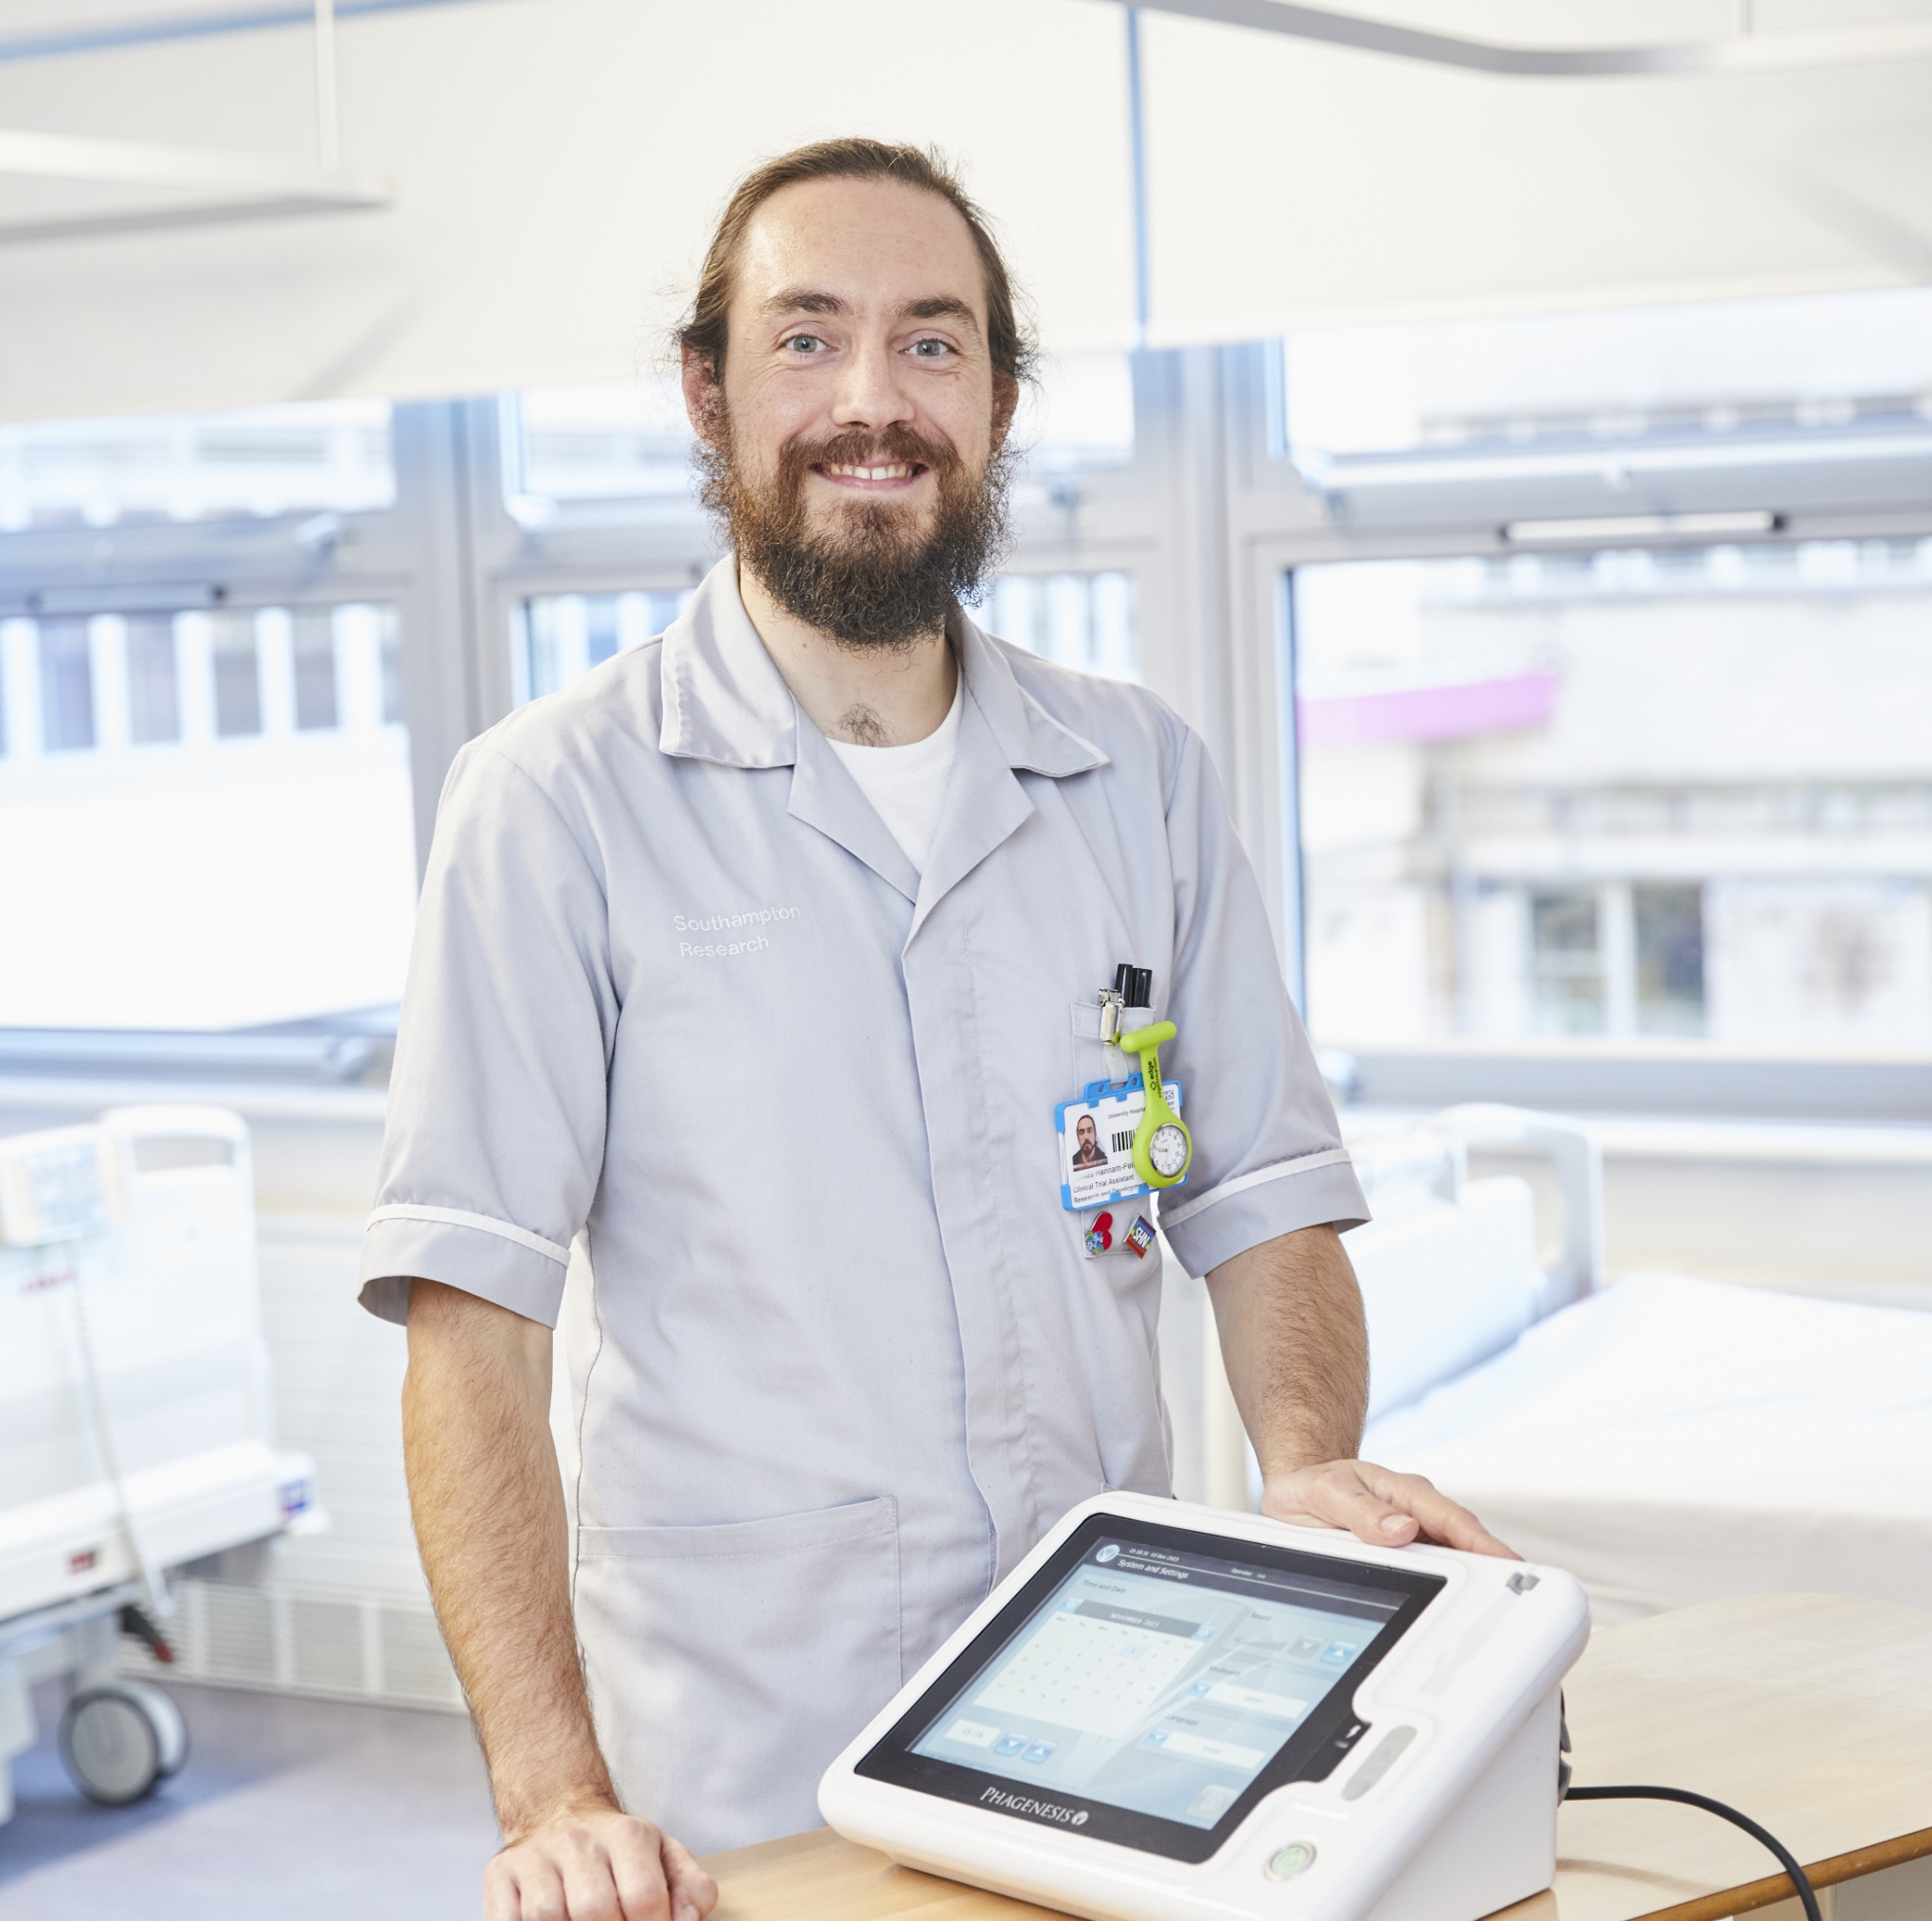 A smiling male healthcare worker with a beard, standing in a hospital room beside a medical device on a trolley. he wears a light grey uniform and an id badge.